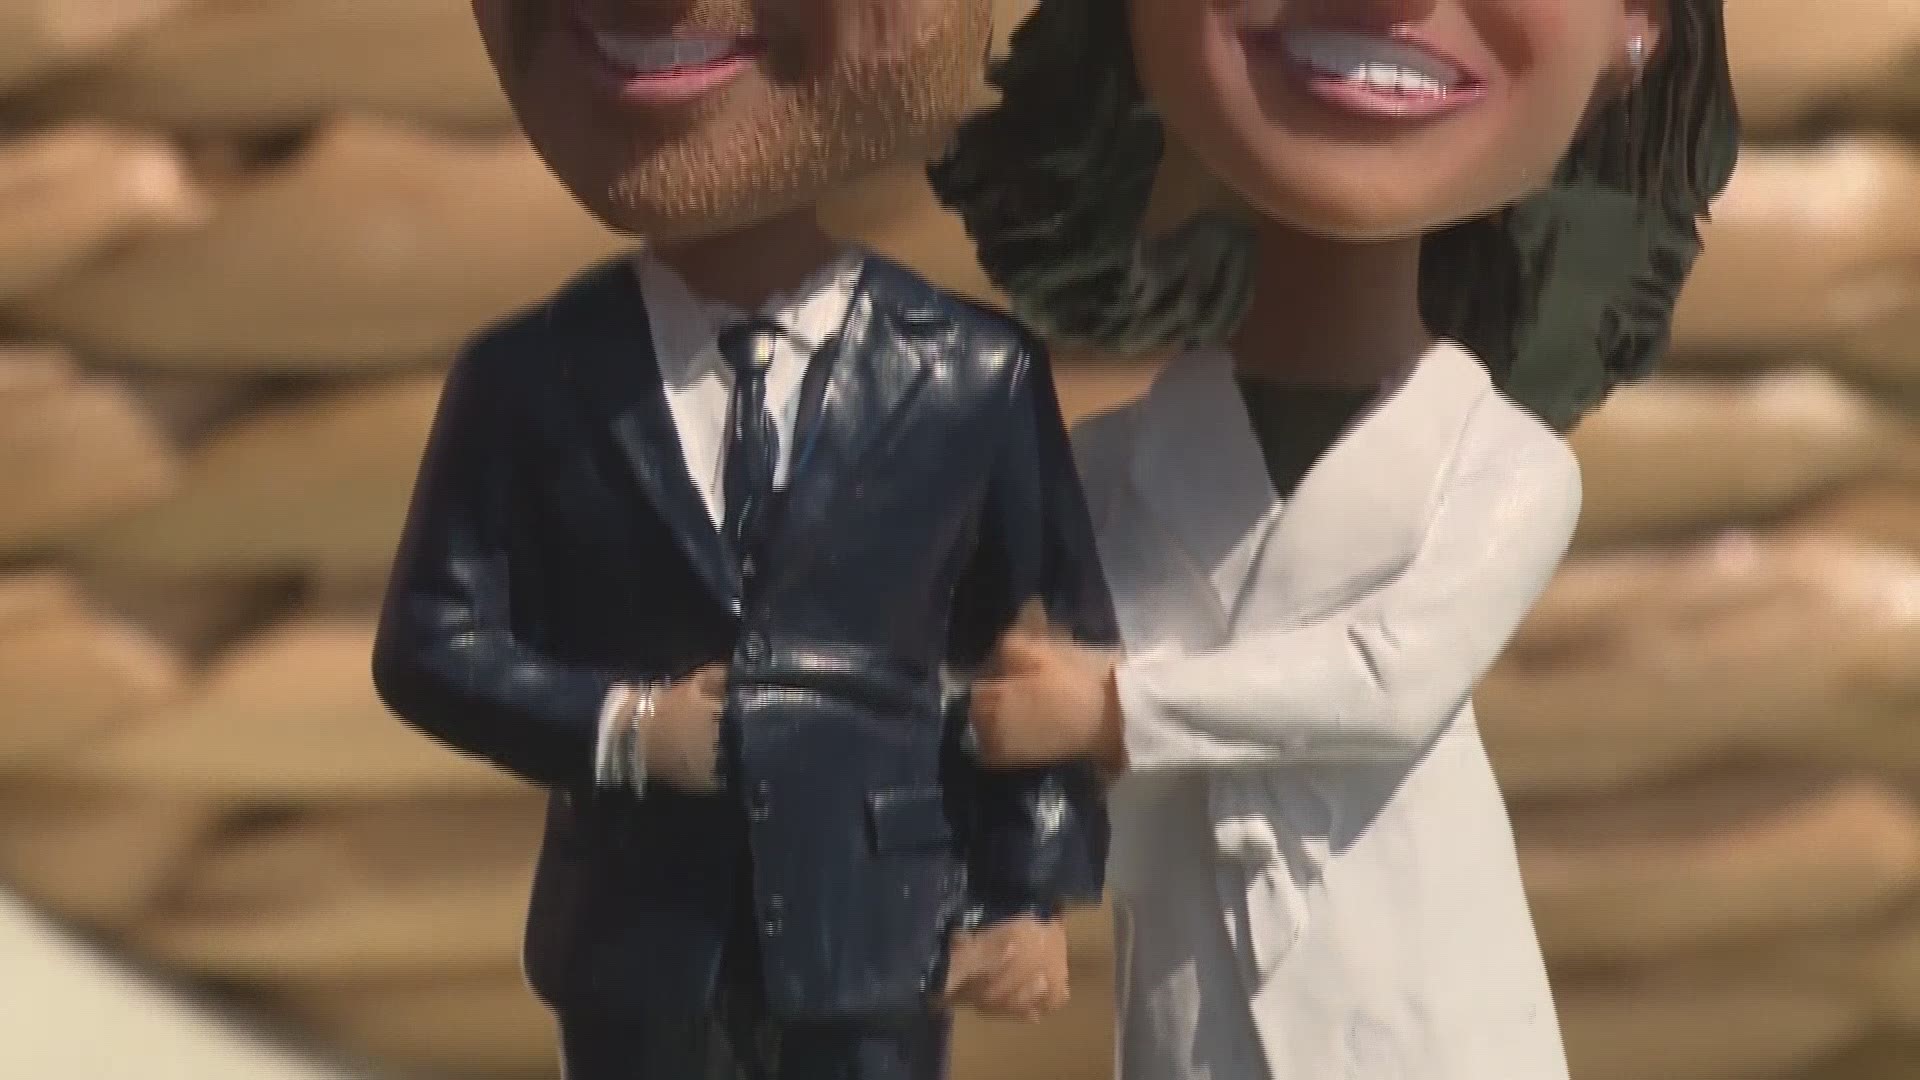 The Greensboro Grasshoppers are celebrating the Royal Wedding by giving away bobbleheads of the Royal couple.